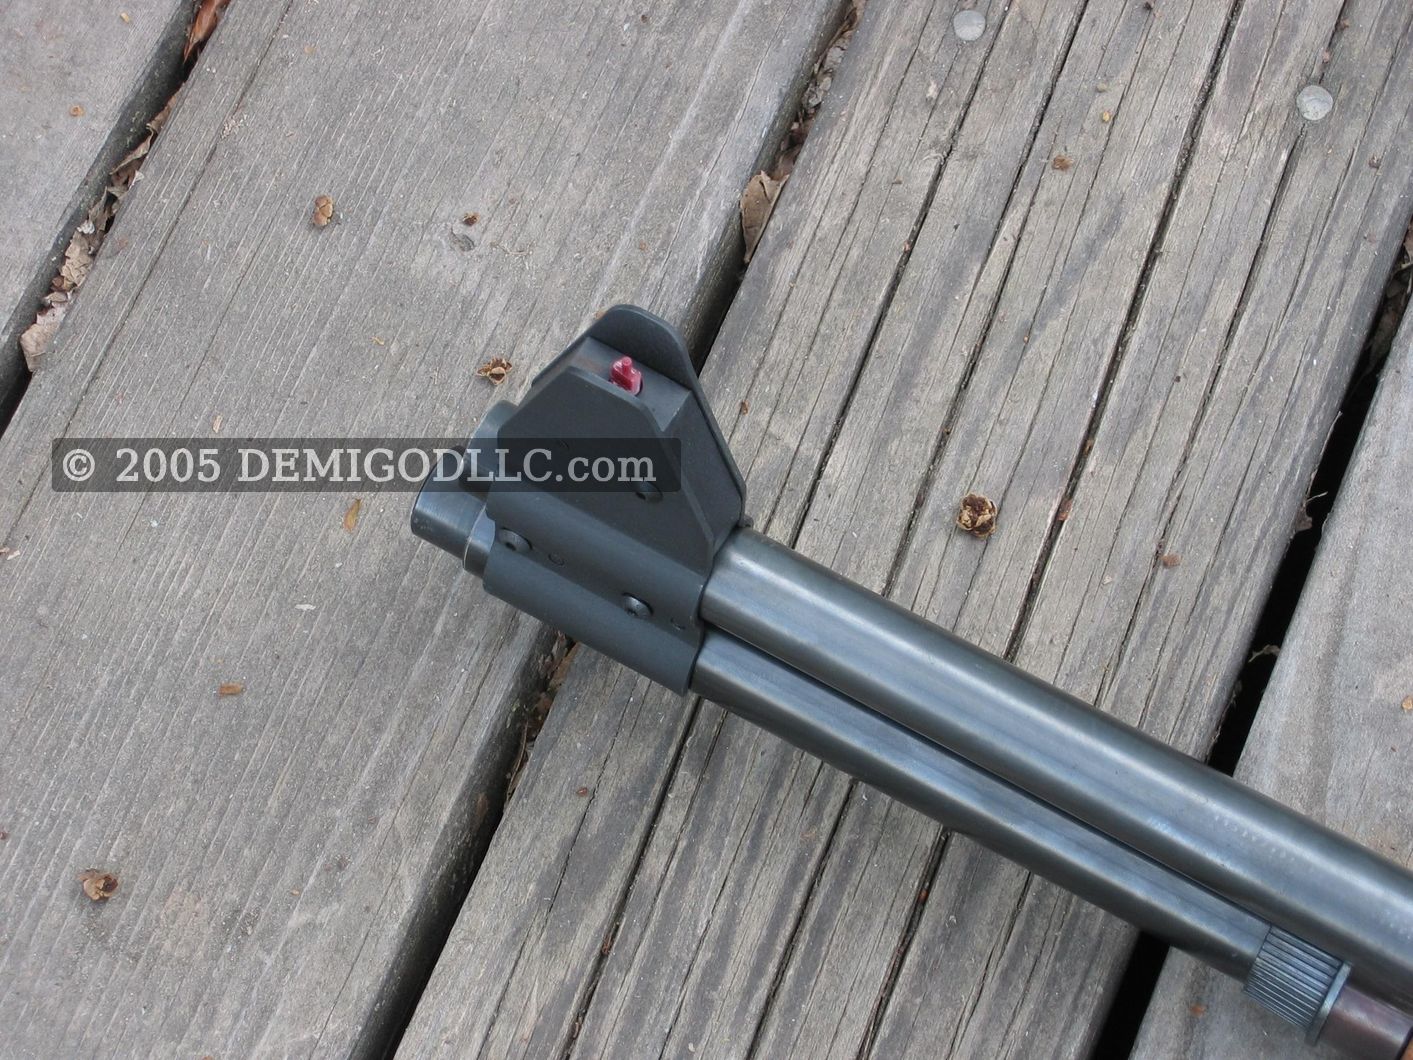 SST-870 AR15 stock adapter for the Remington 870
, photo 